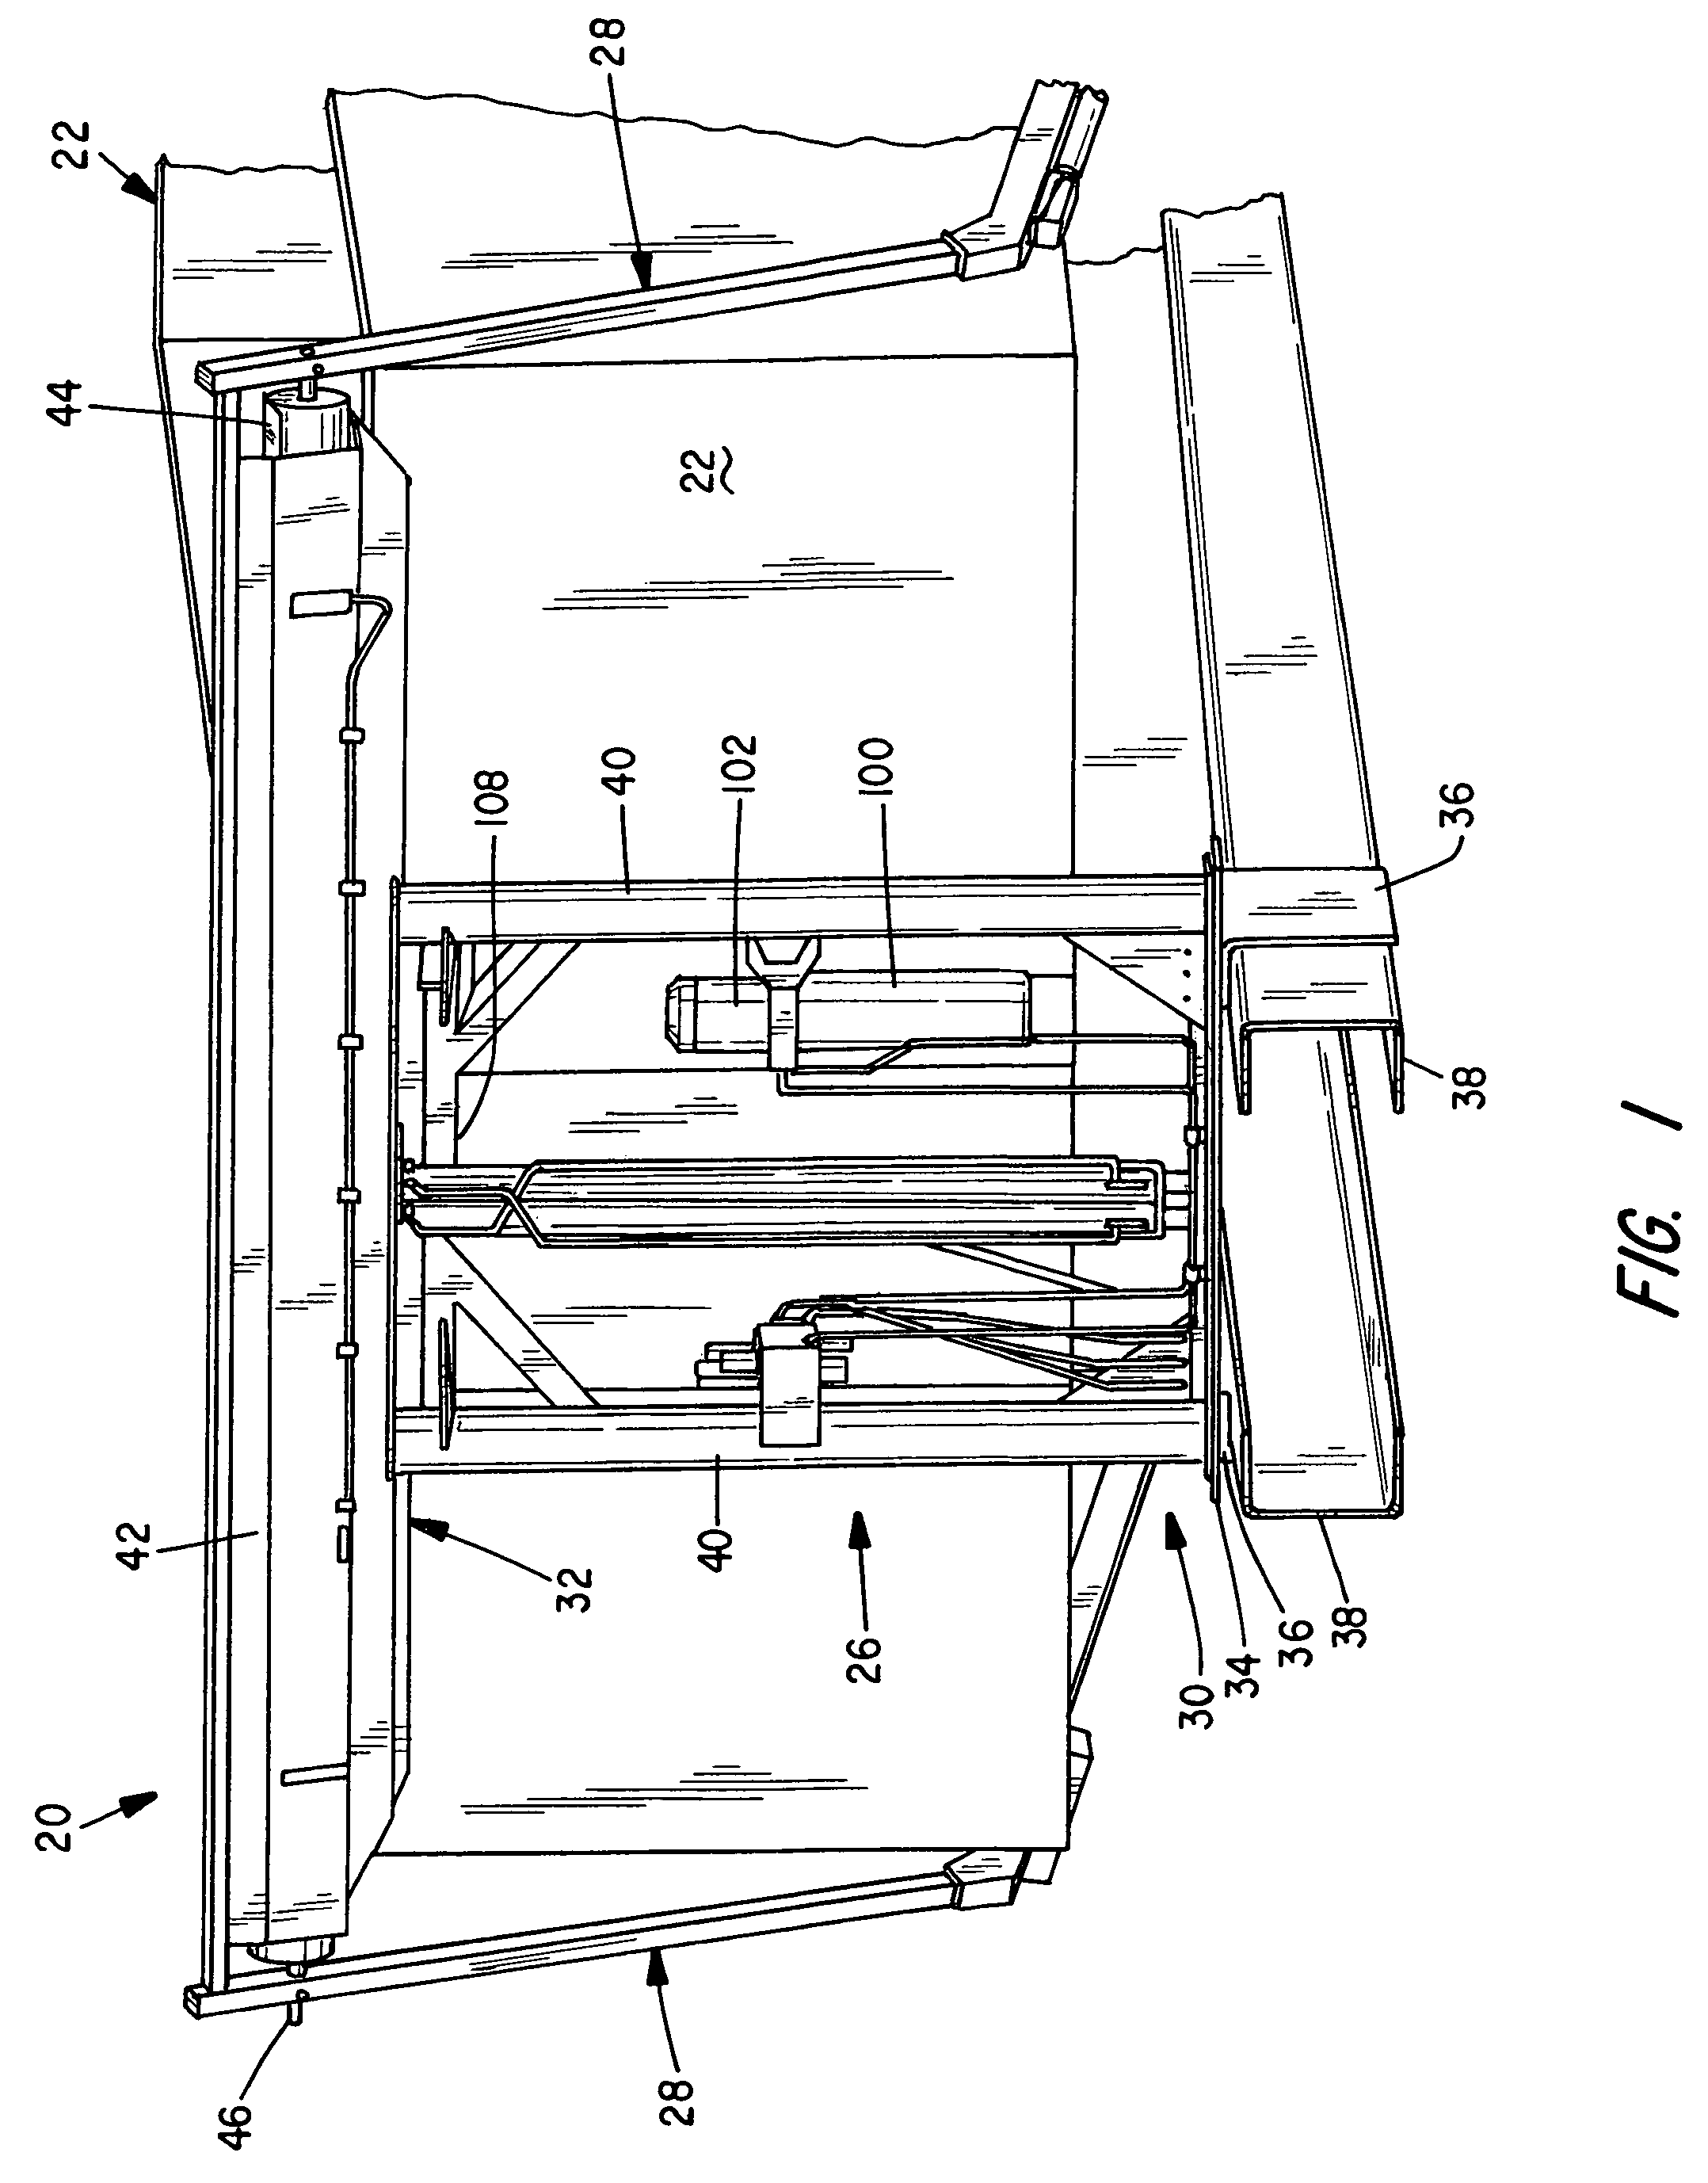 Automated cover system for vehicle-mounted containers